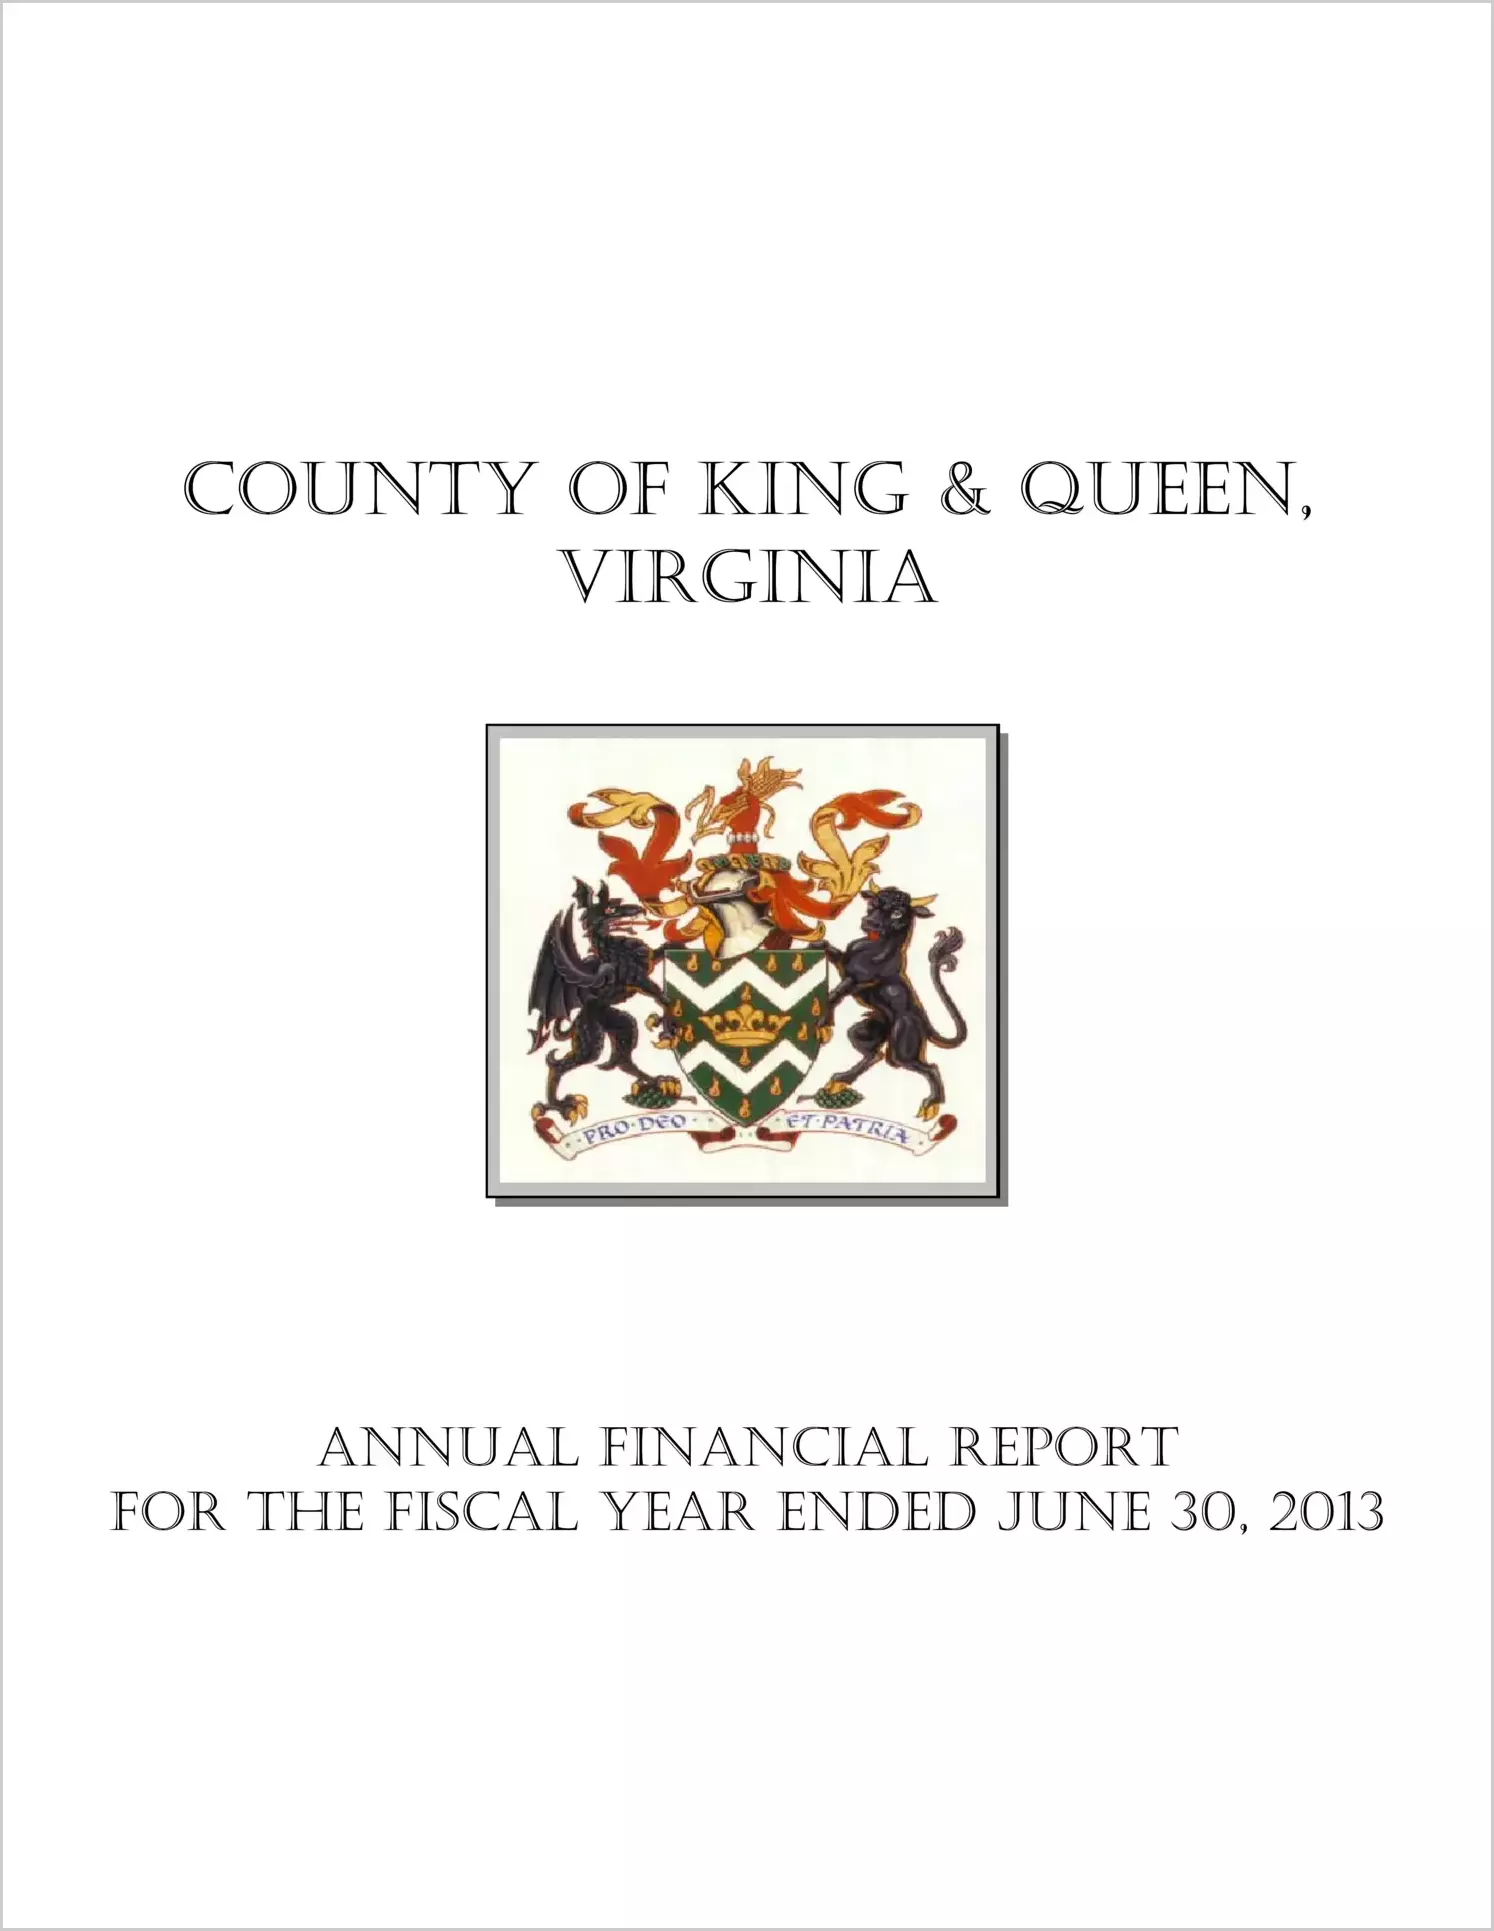 2013 Annual Financial Report for County of King & Queen